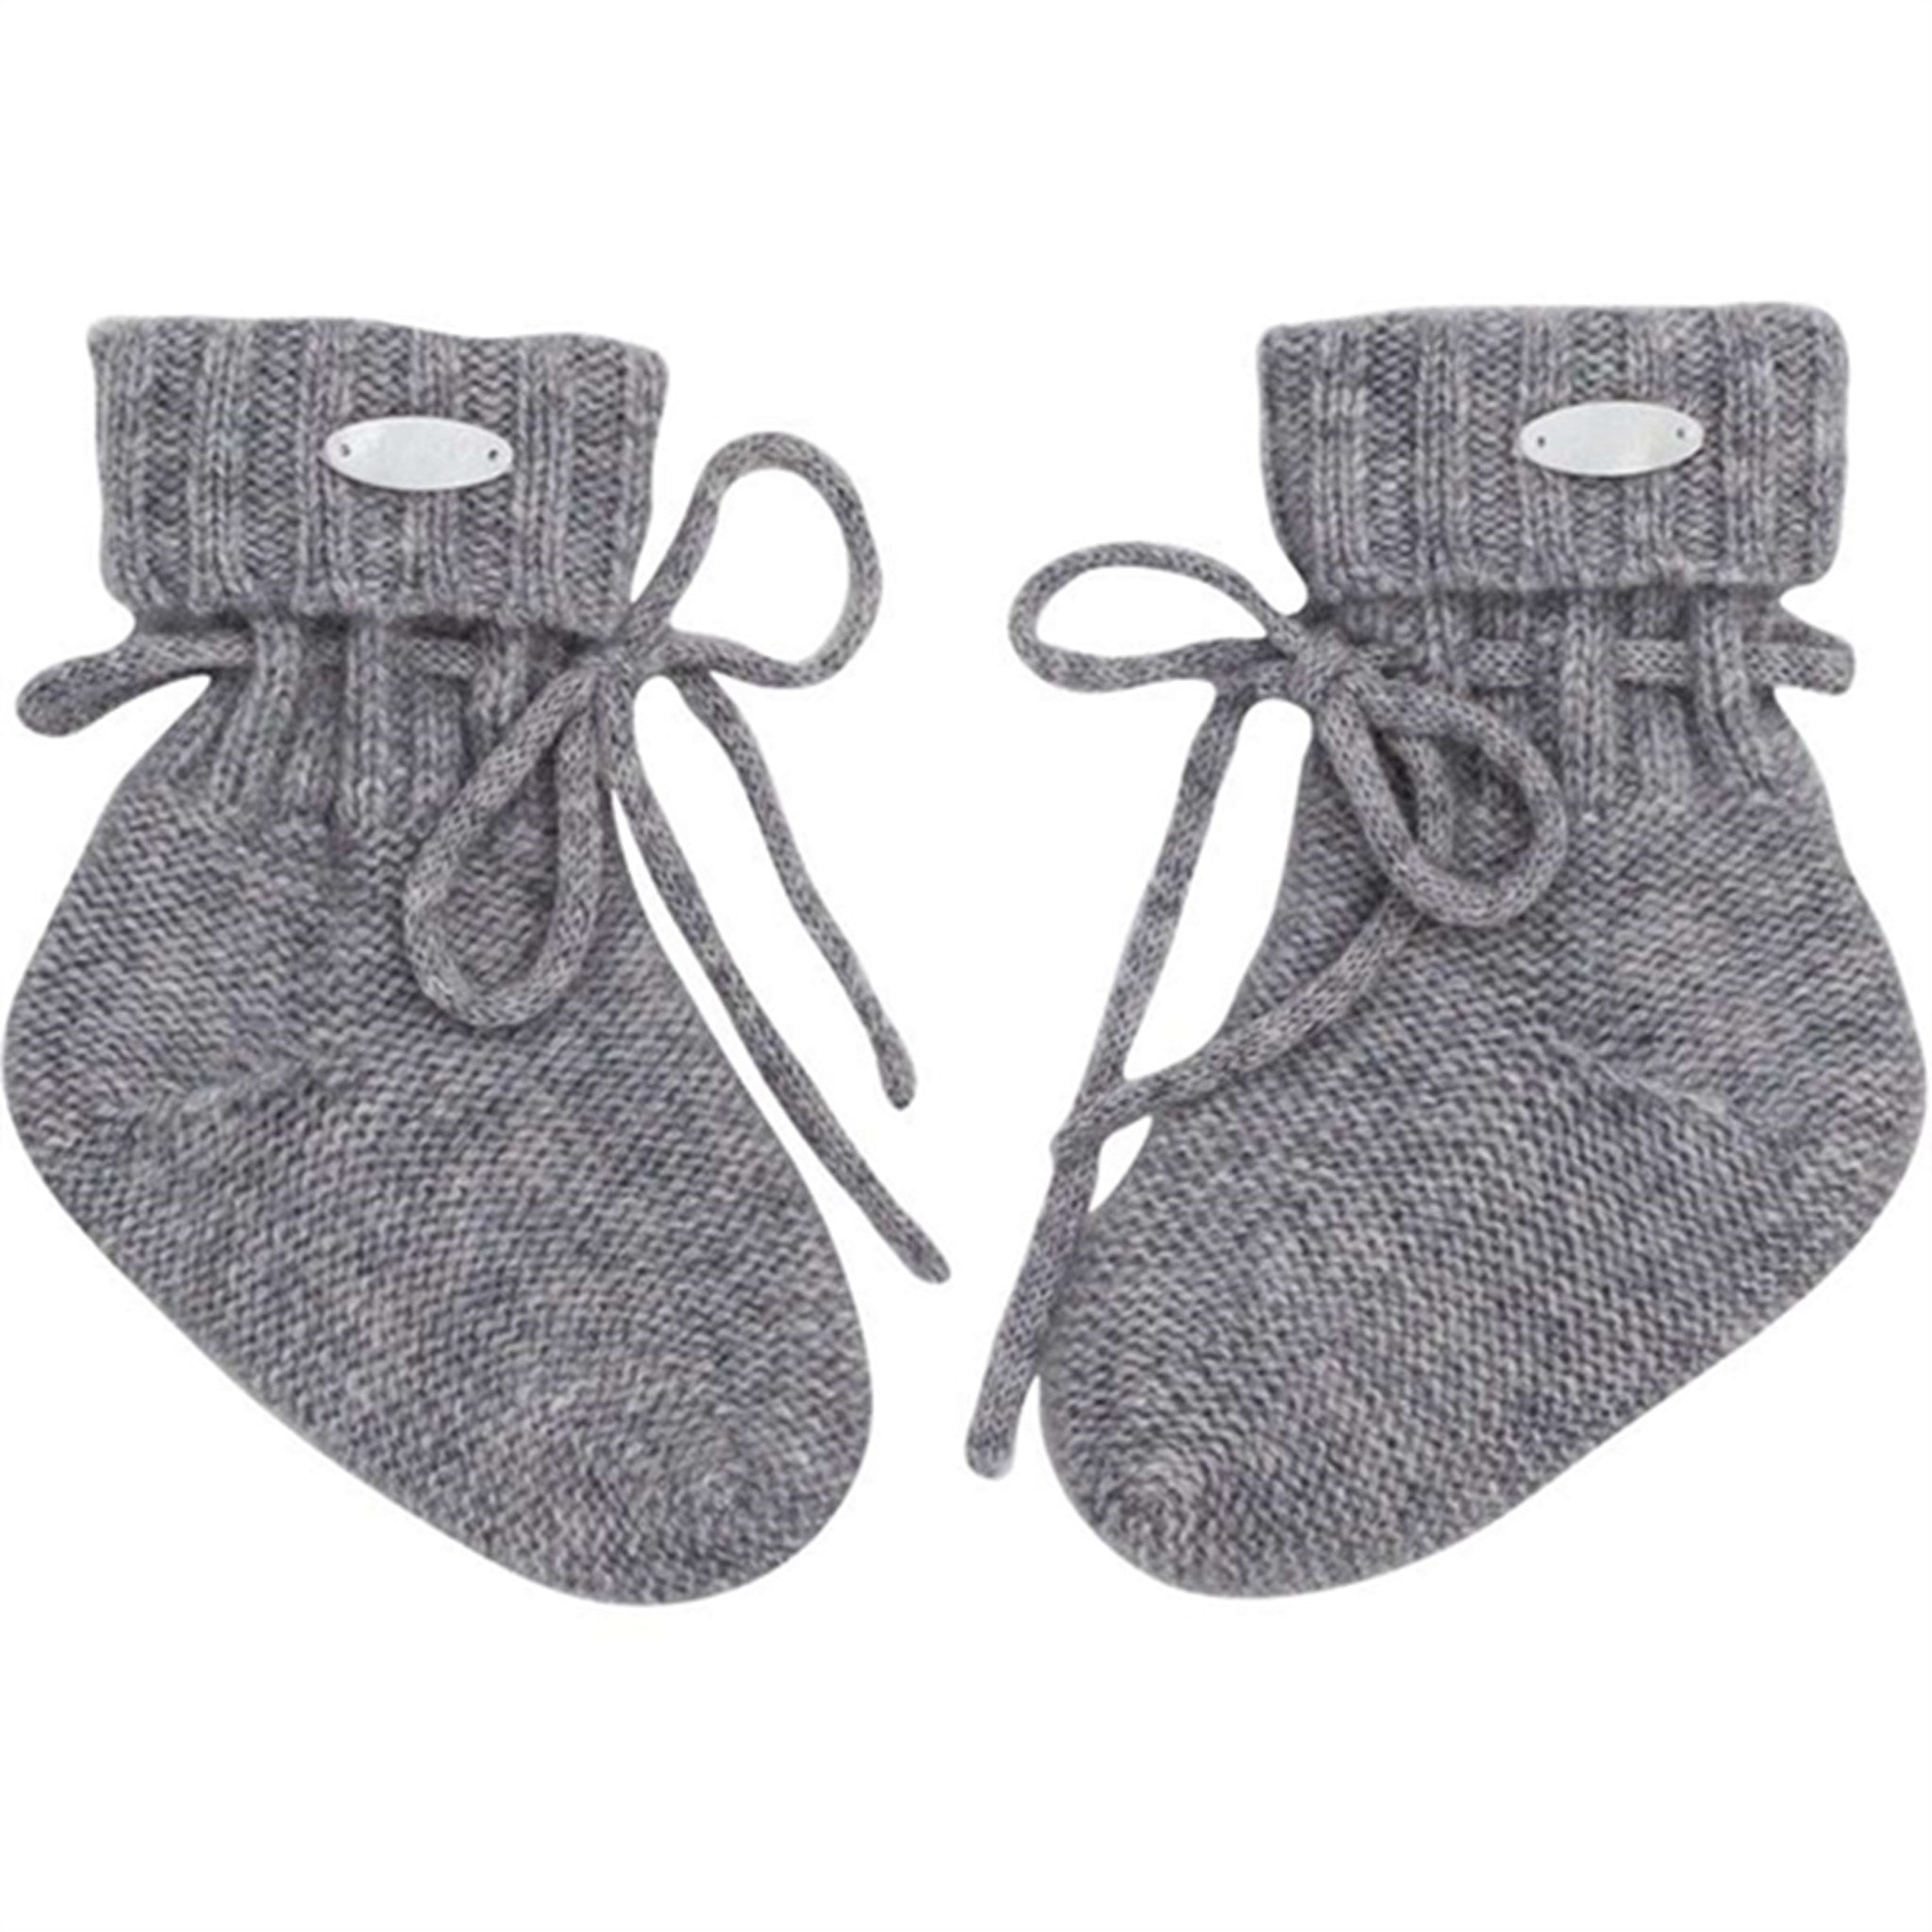 HOLMM Oxford Stumpi Cashmere Knit Booties